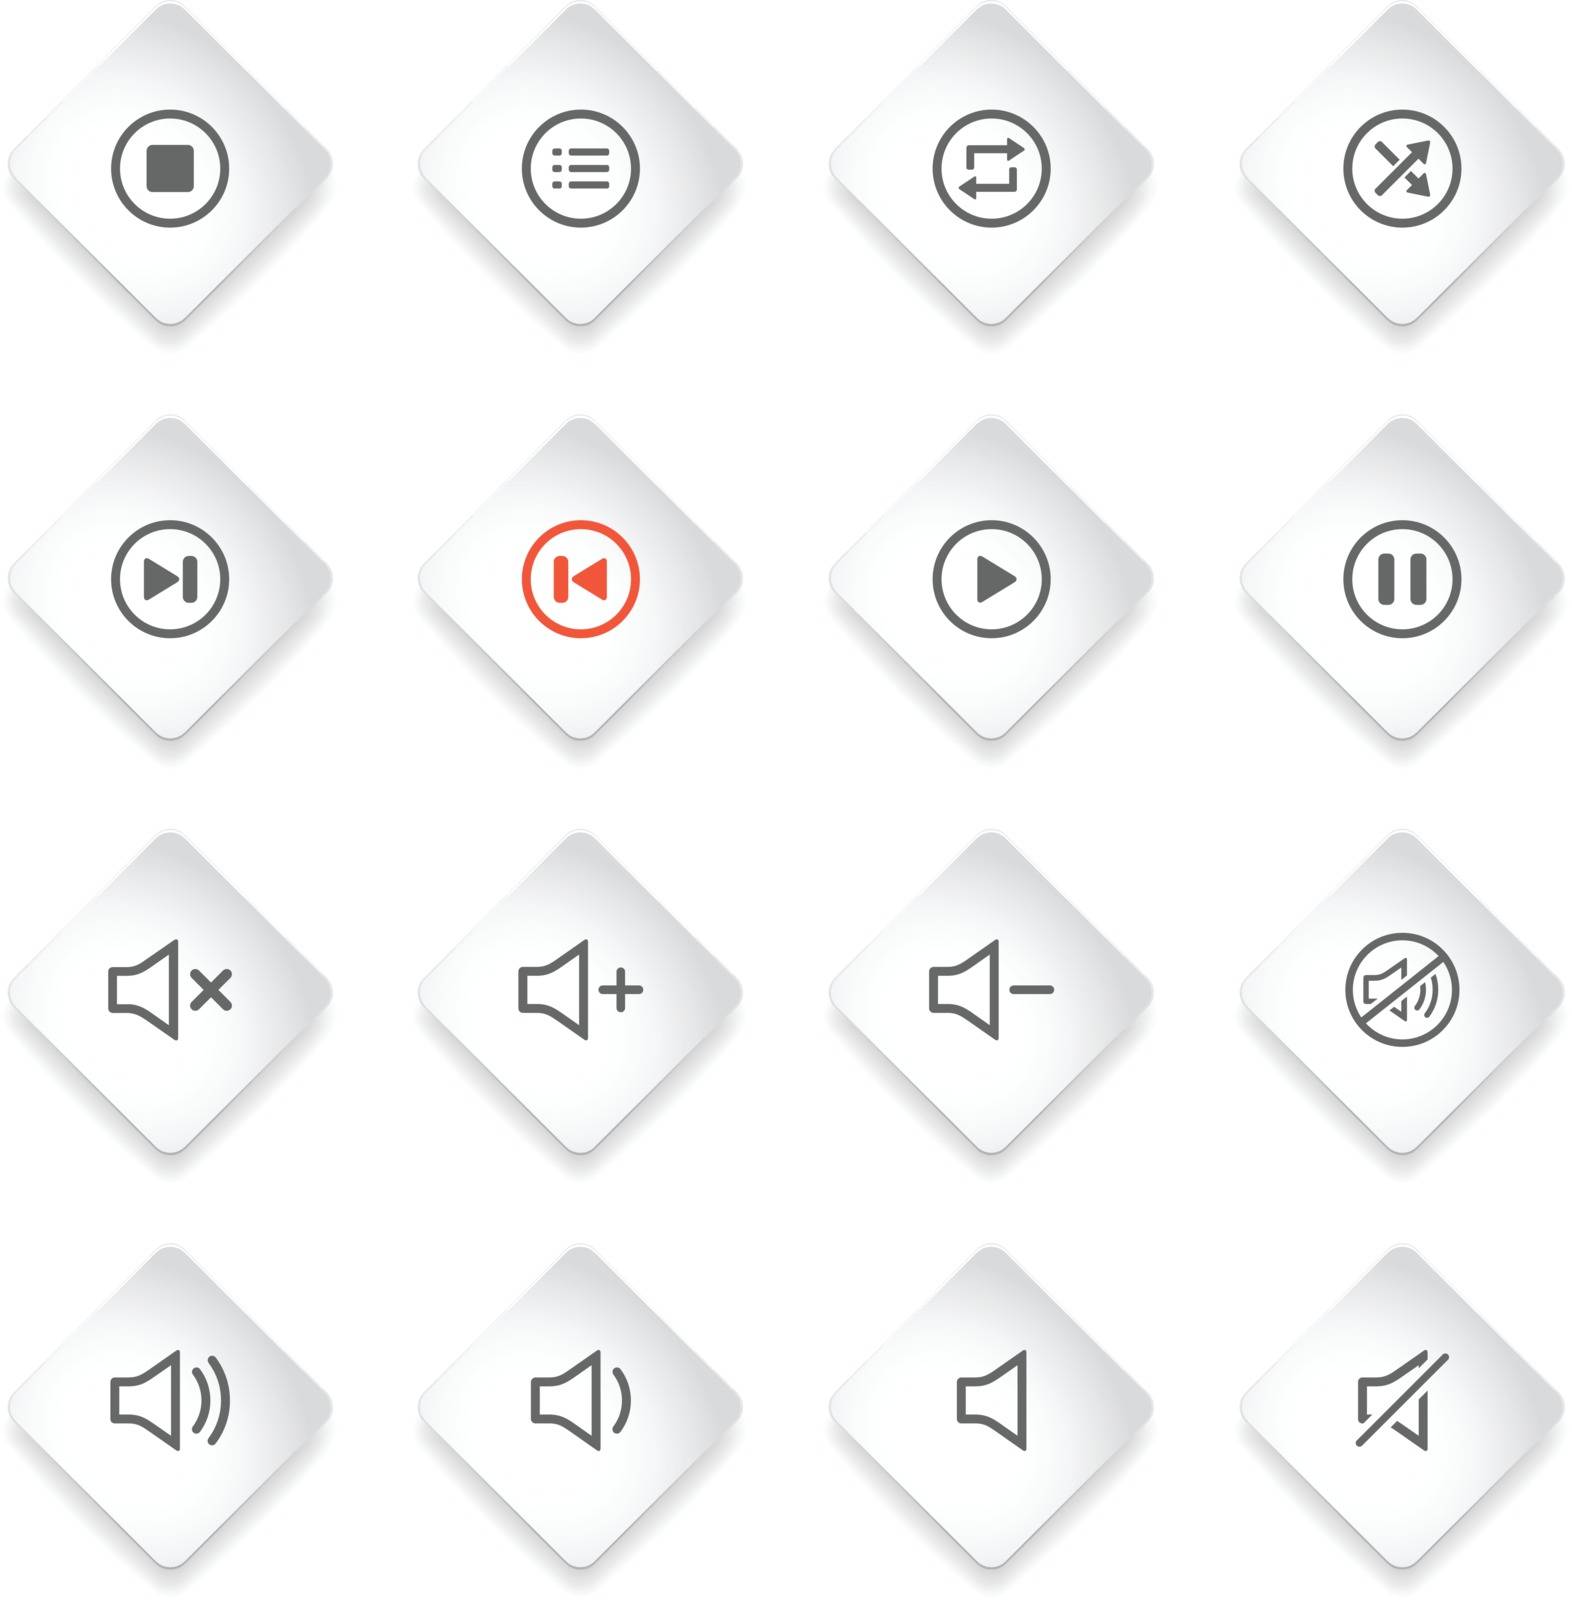 Media player icons by ayax